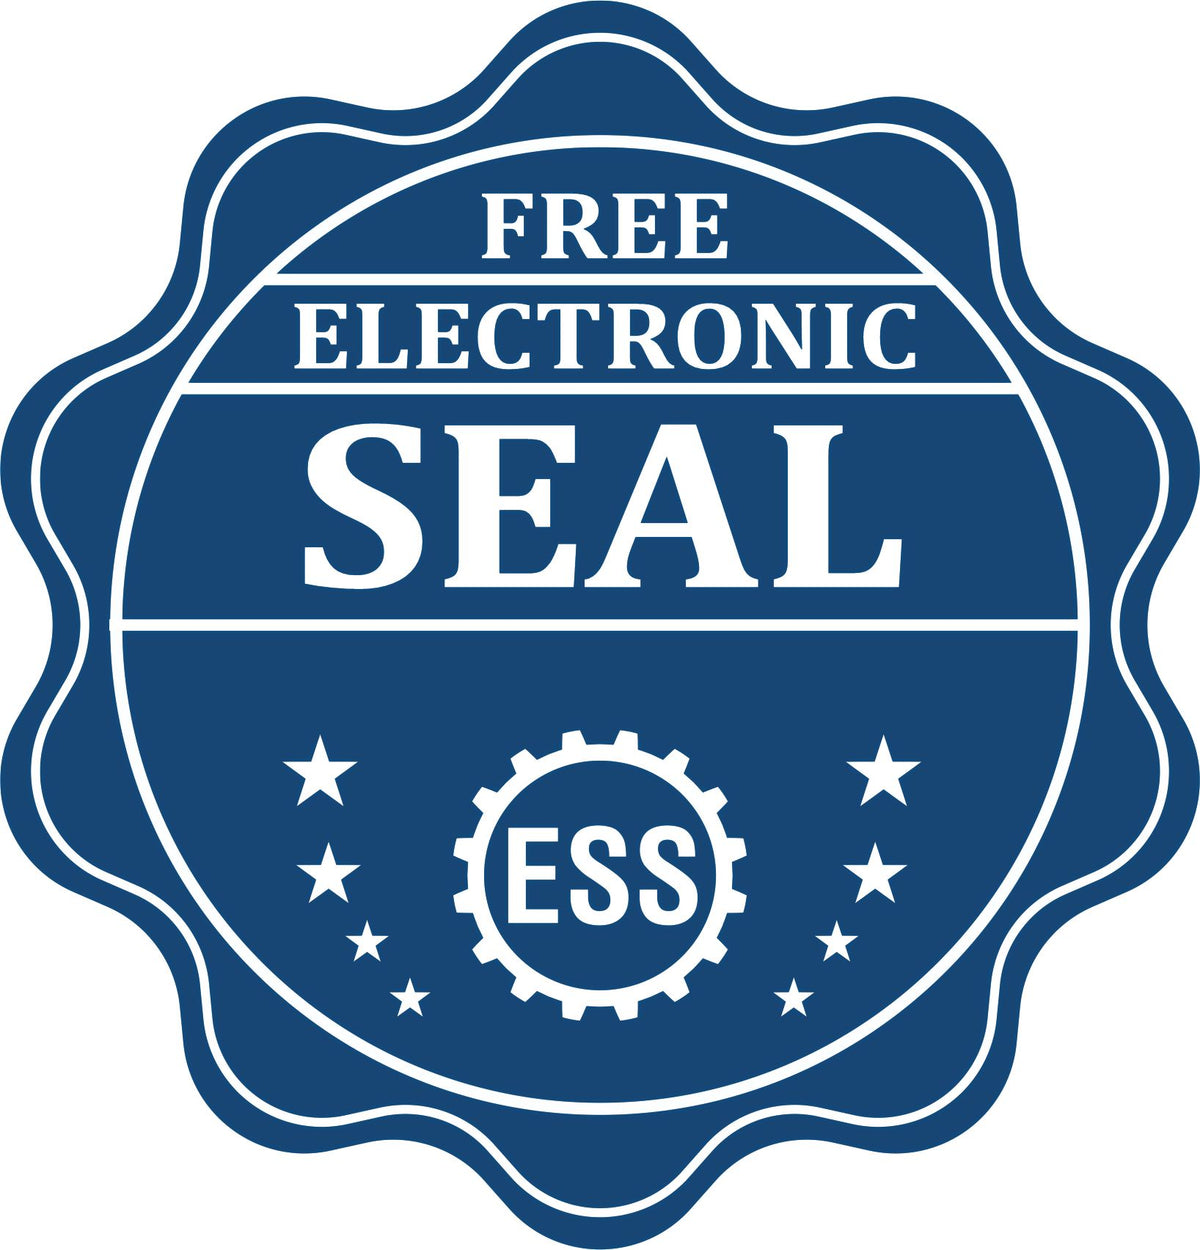 A badge showing a free electronic seal for the Slim Pre-Inked Connecticut Land Surveyor Seal Stamp with stars and the ESS gear on the emblem.